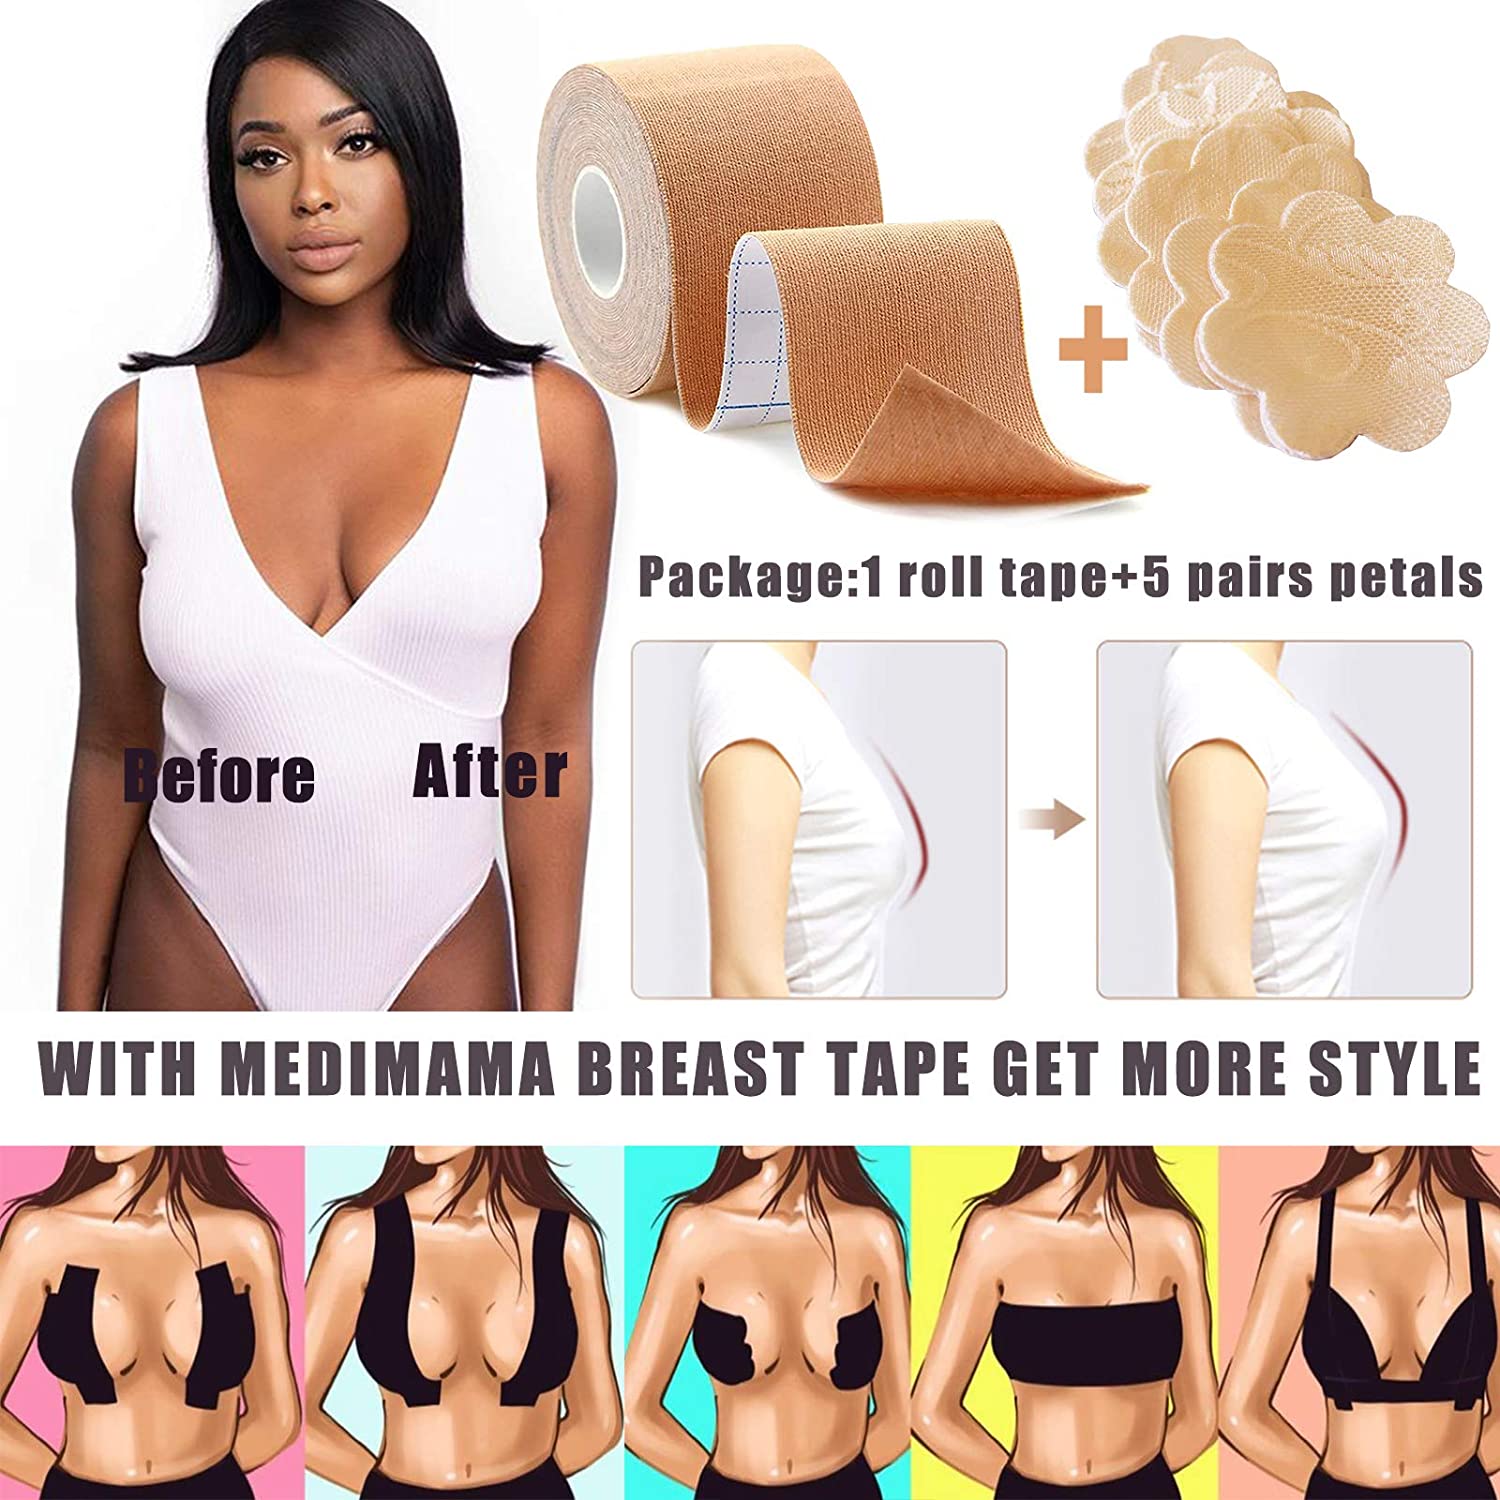 How To Tape Up Breasts For Strapless Dress